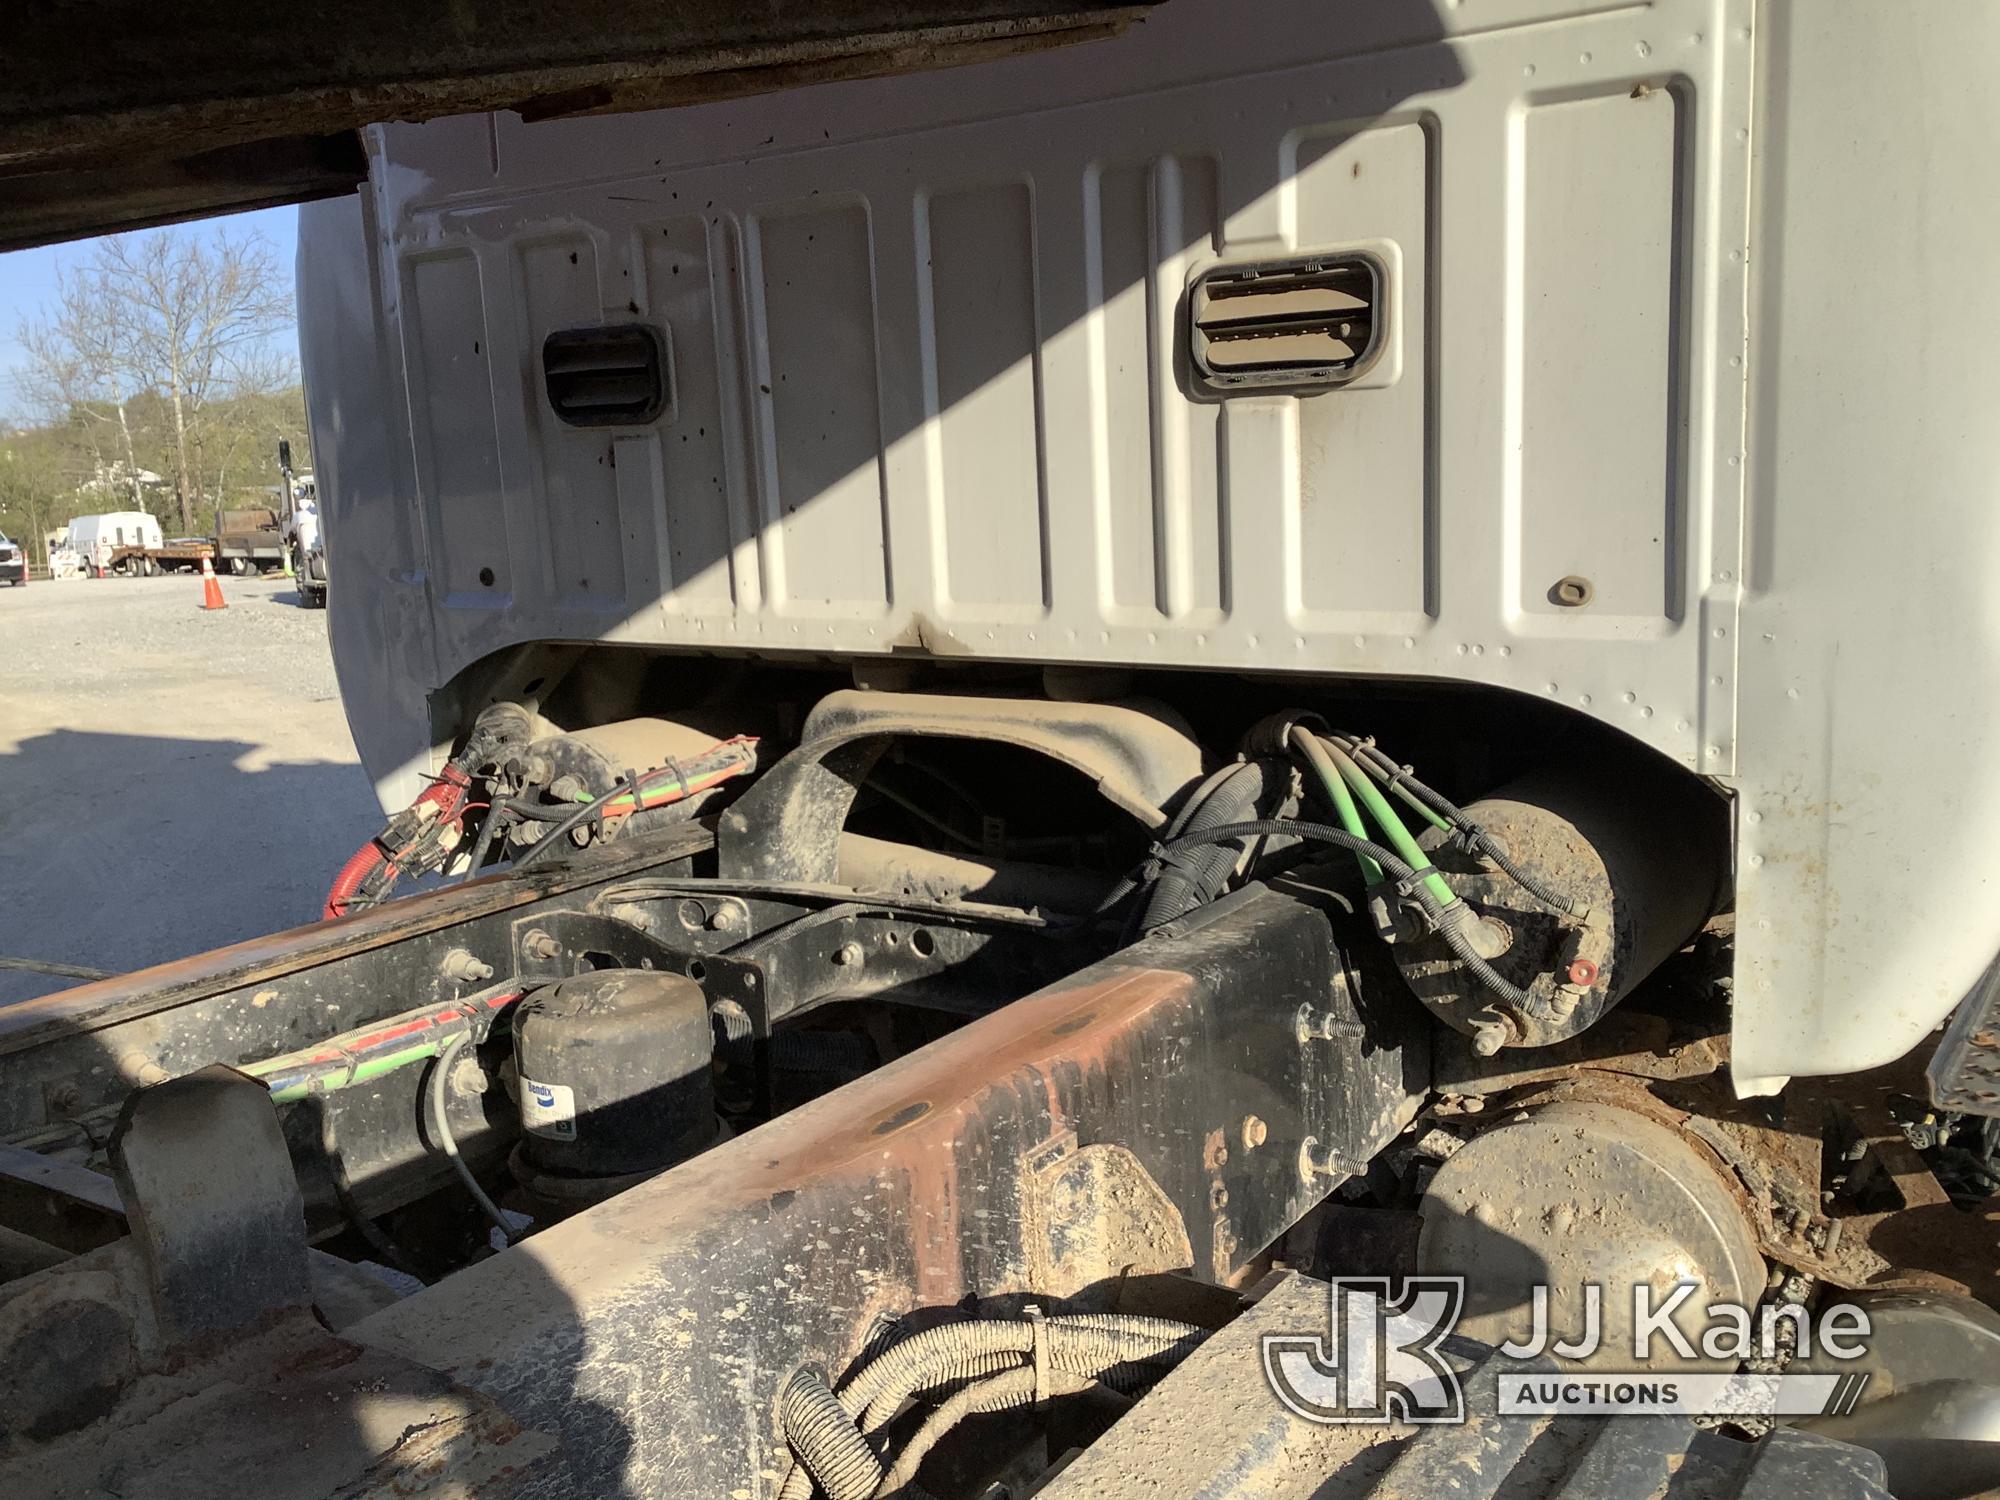 (Houston, PA) 2013 Ford F750 Dump Truck Runs, Moves & Operates, Check Engine Light On, Rust Damage